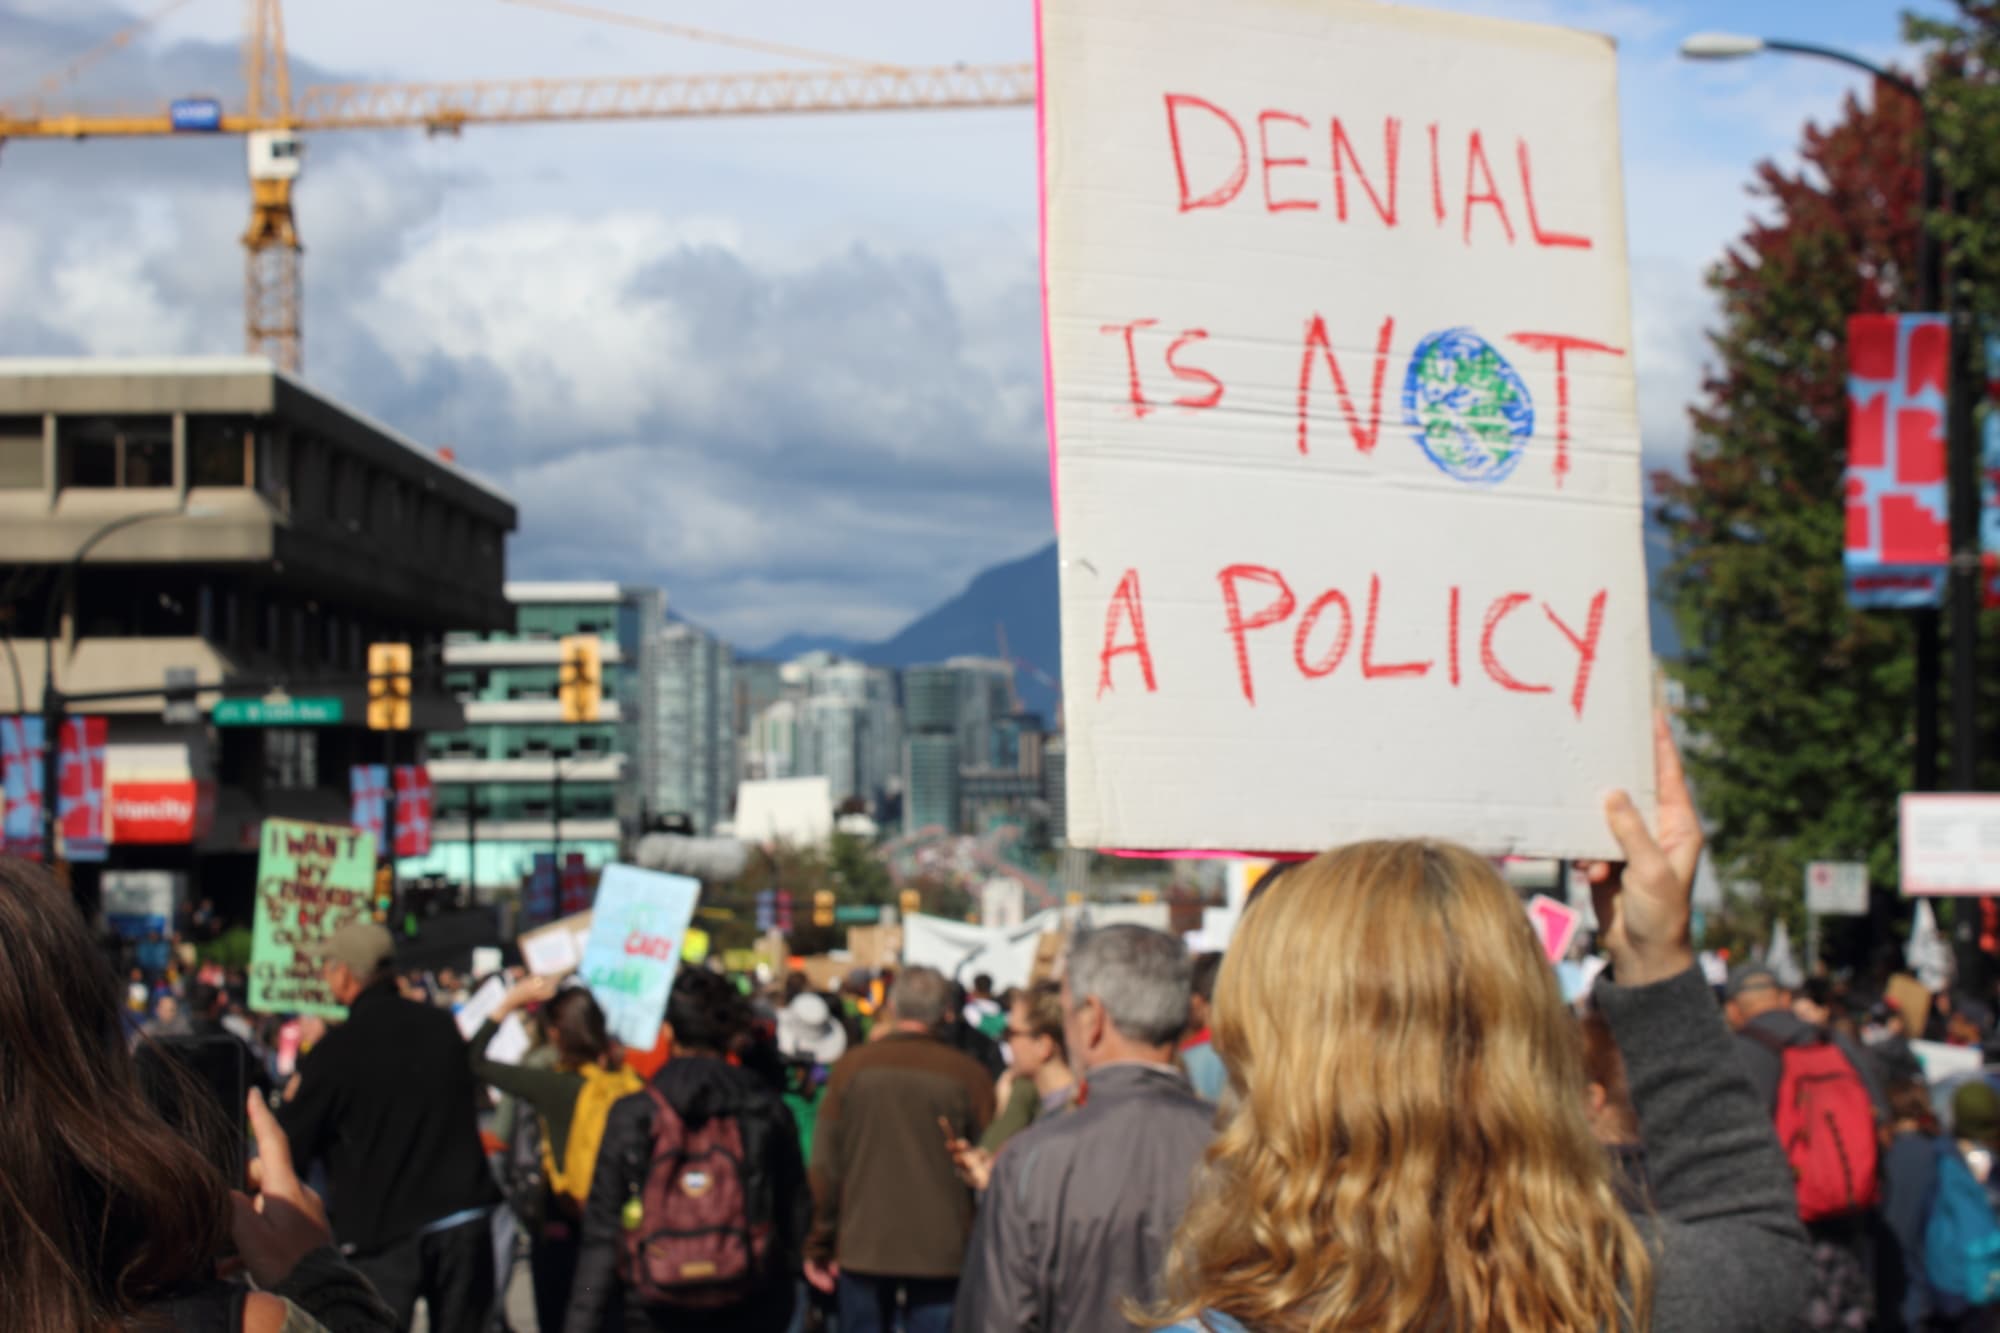 Climate March Sign - "Denial is Not a Policy"